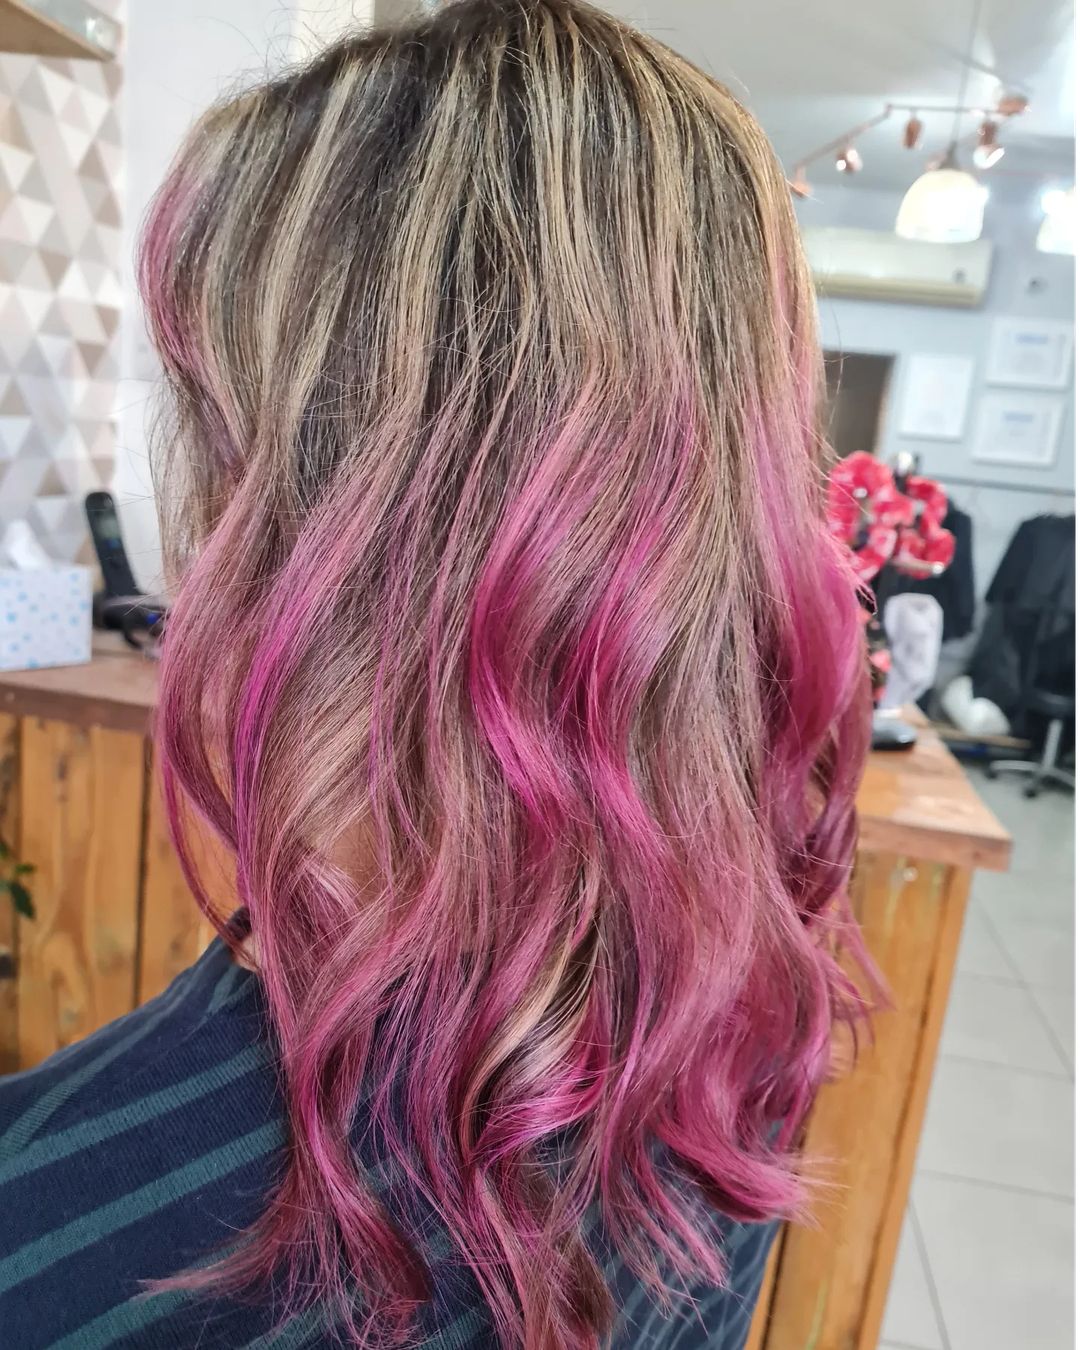 pink ombre hair color 141 Ombre pink hair blonde | Pastel pink ombre hair | Pink balayage Hair Pink Ombre Hair Color for Women